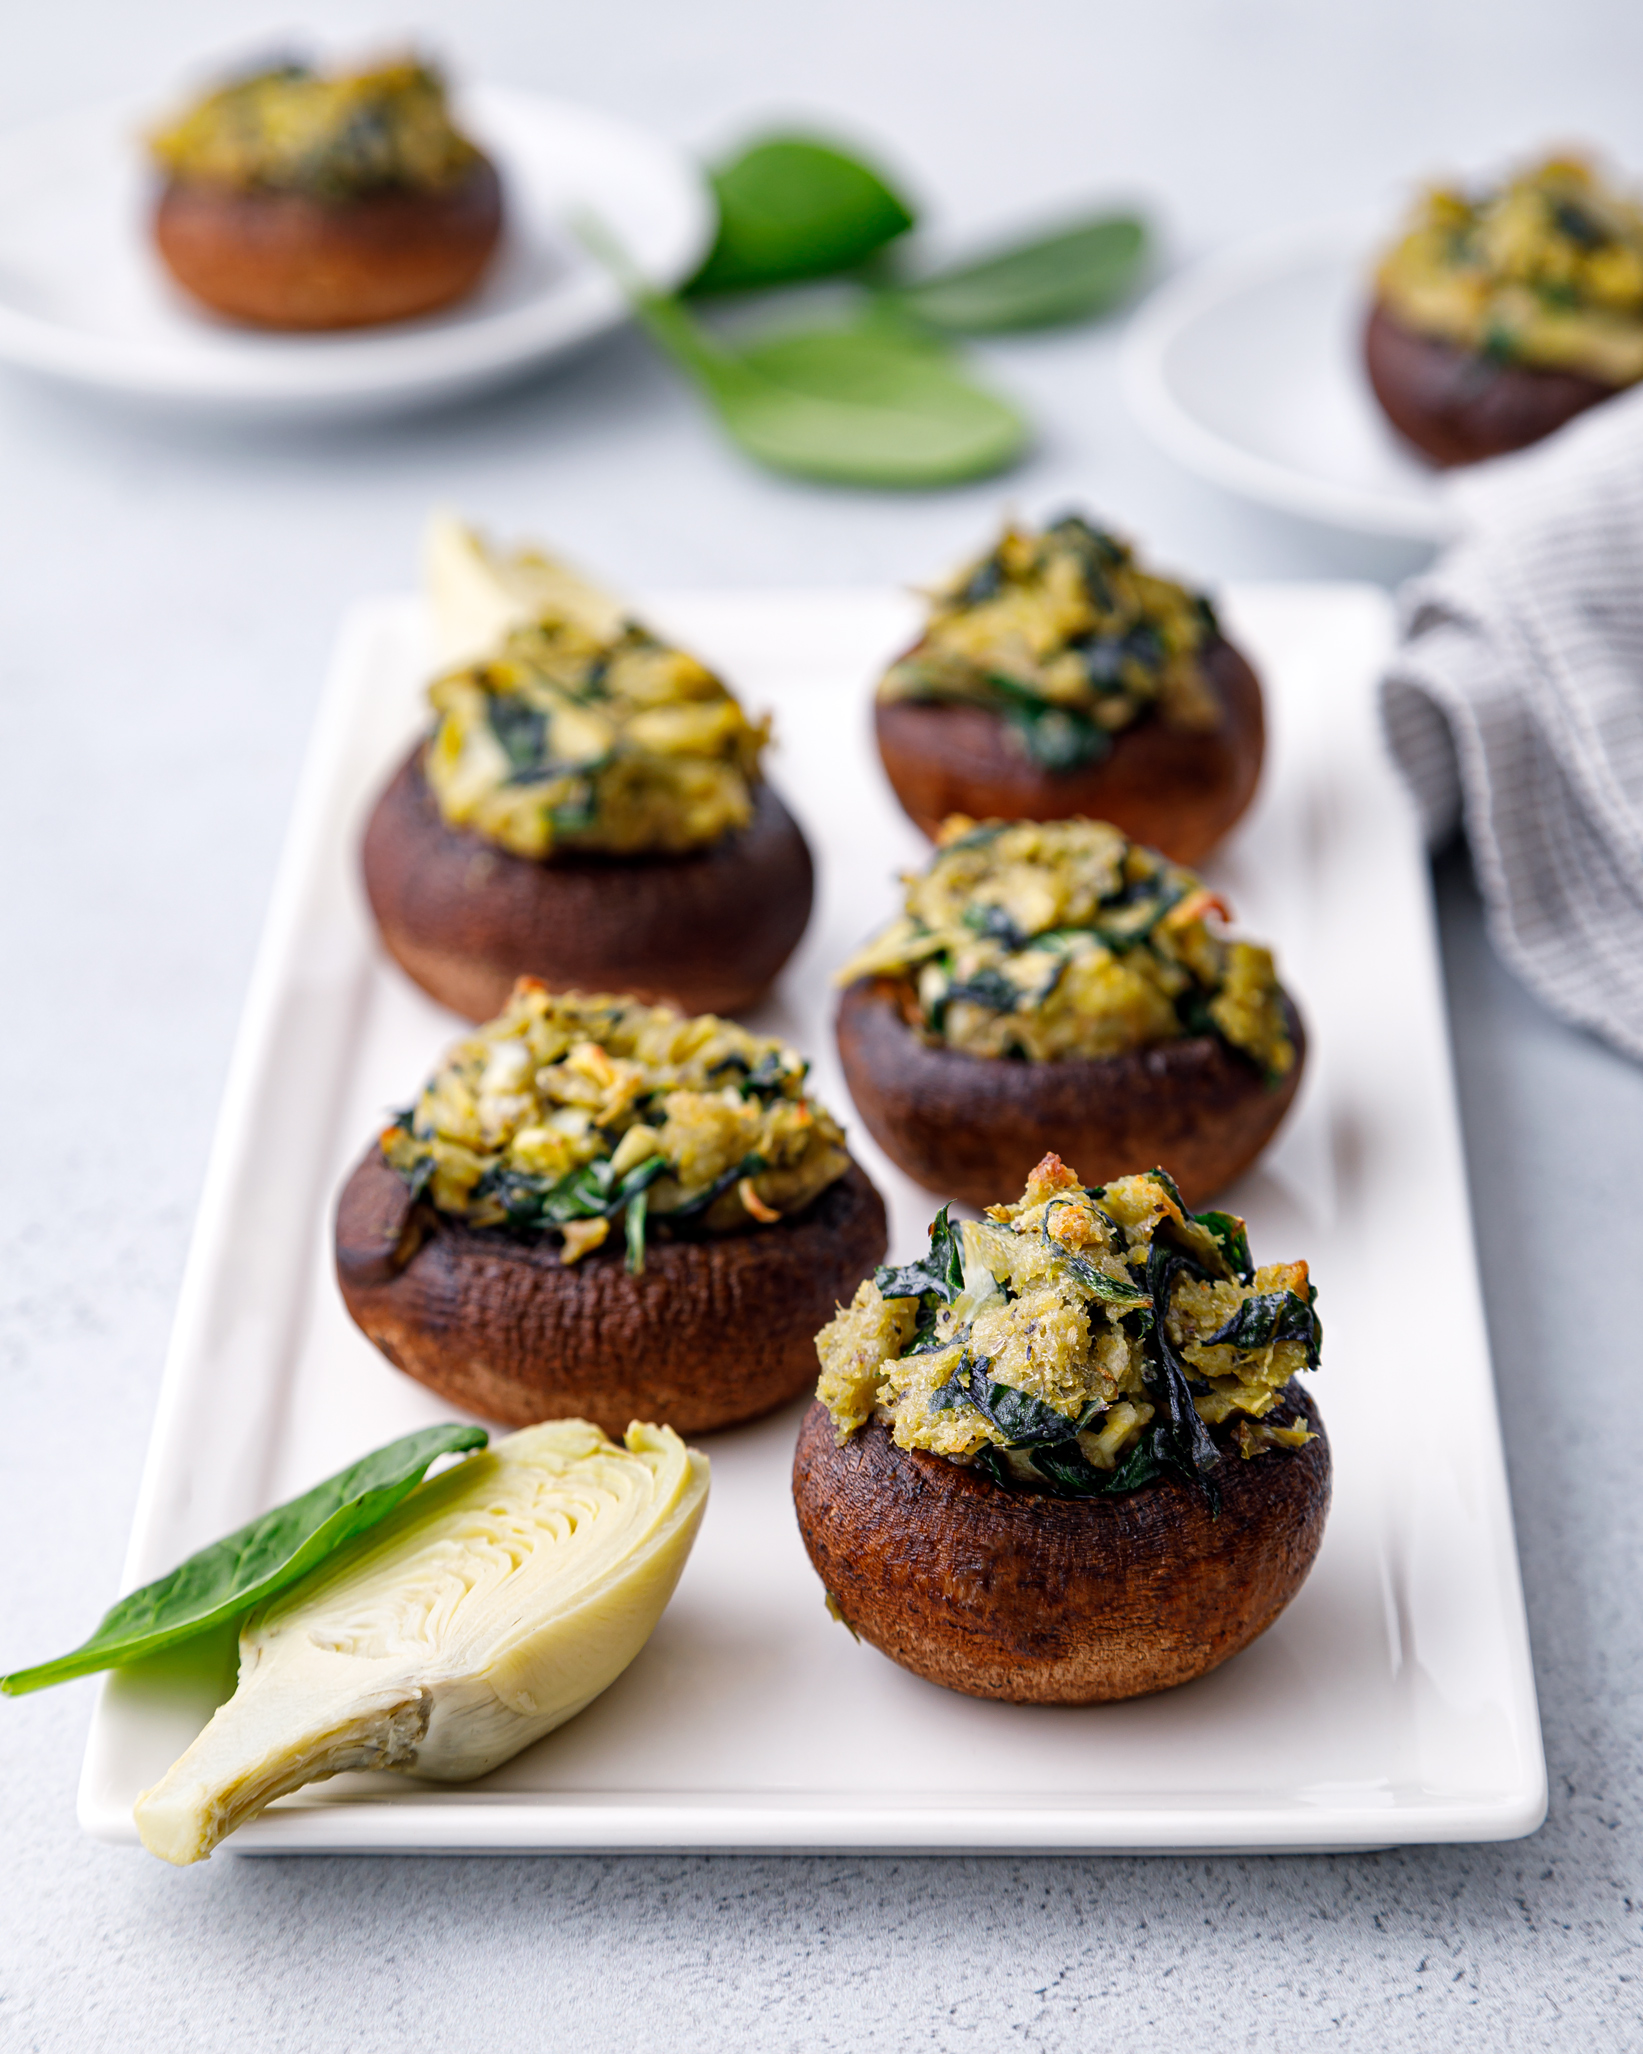 5 mushrooms stuffed with spinach and artichoke feeling on a white plate sitting on a white table